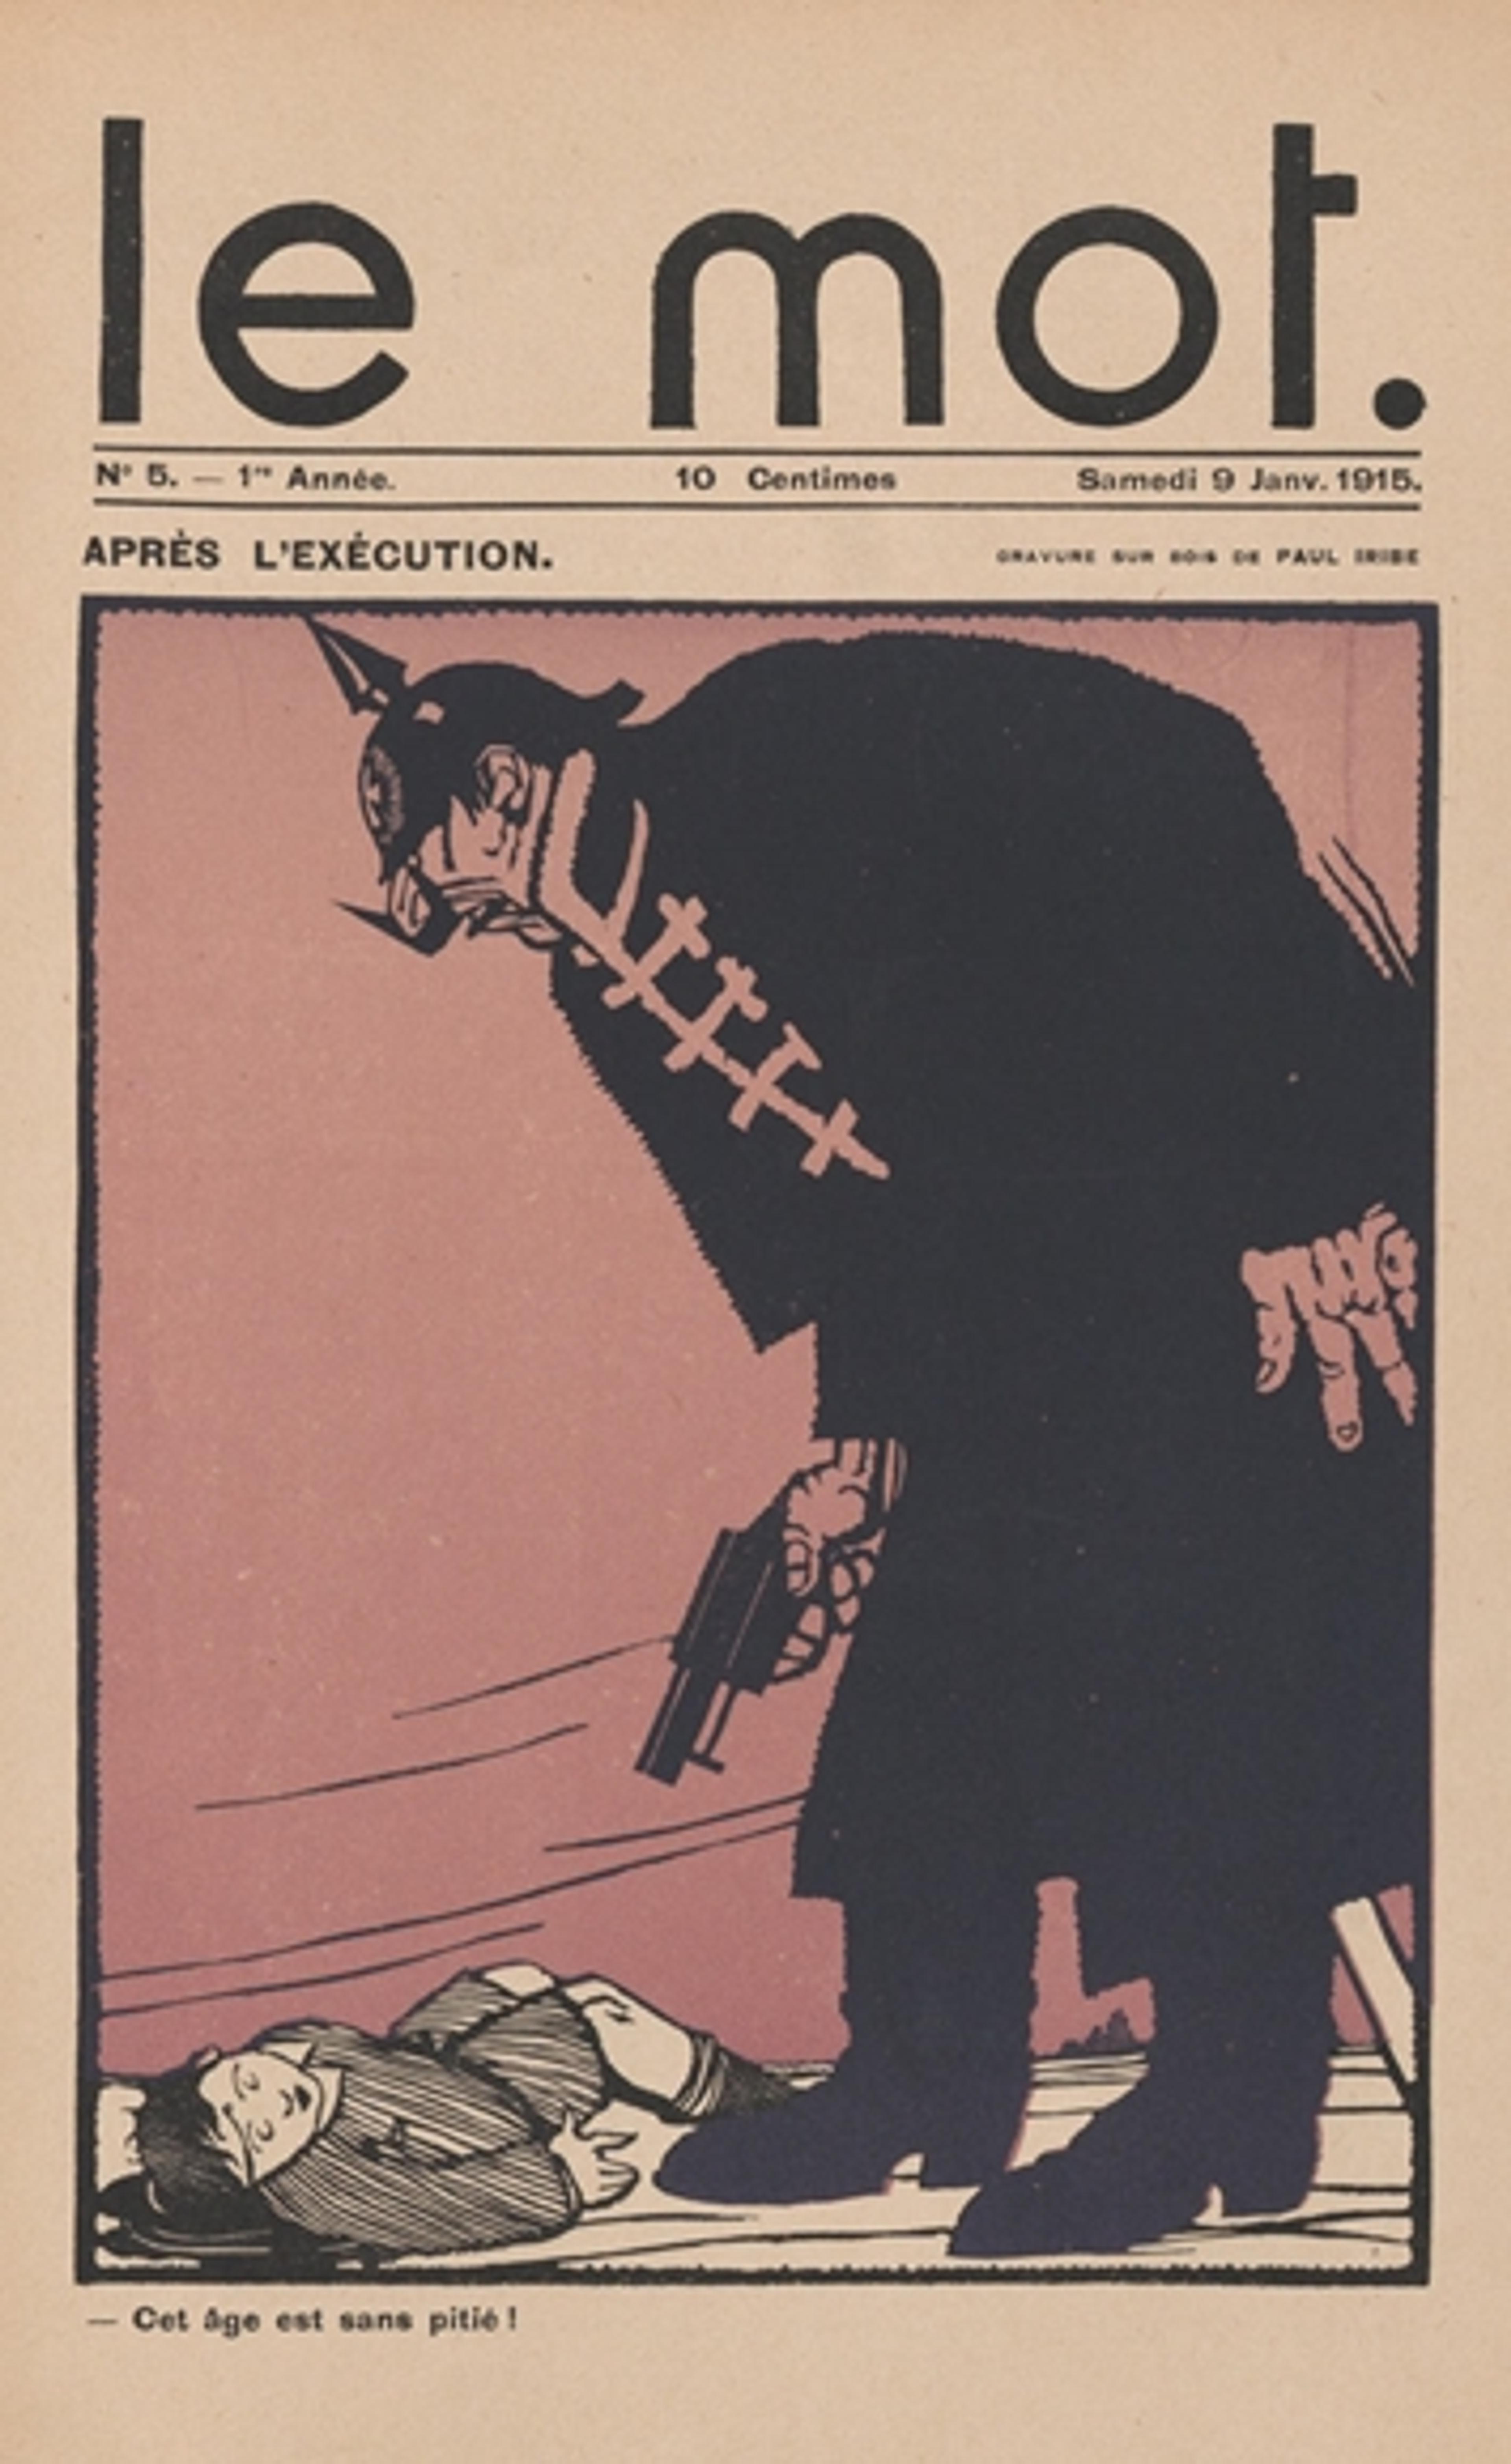 Paul Iribe | After the Execution, cover of Le Mot, 1915 | Lithograph magazine cover showing a soldier hovering over an injured child